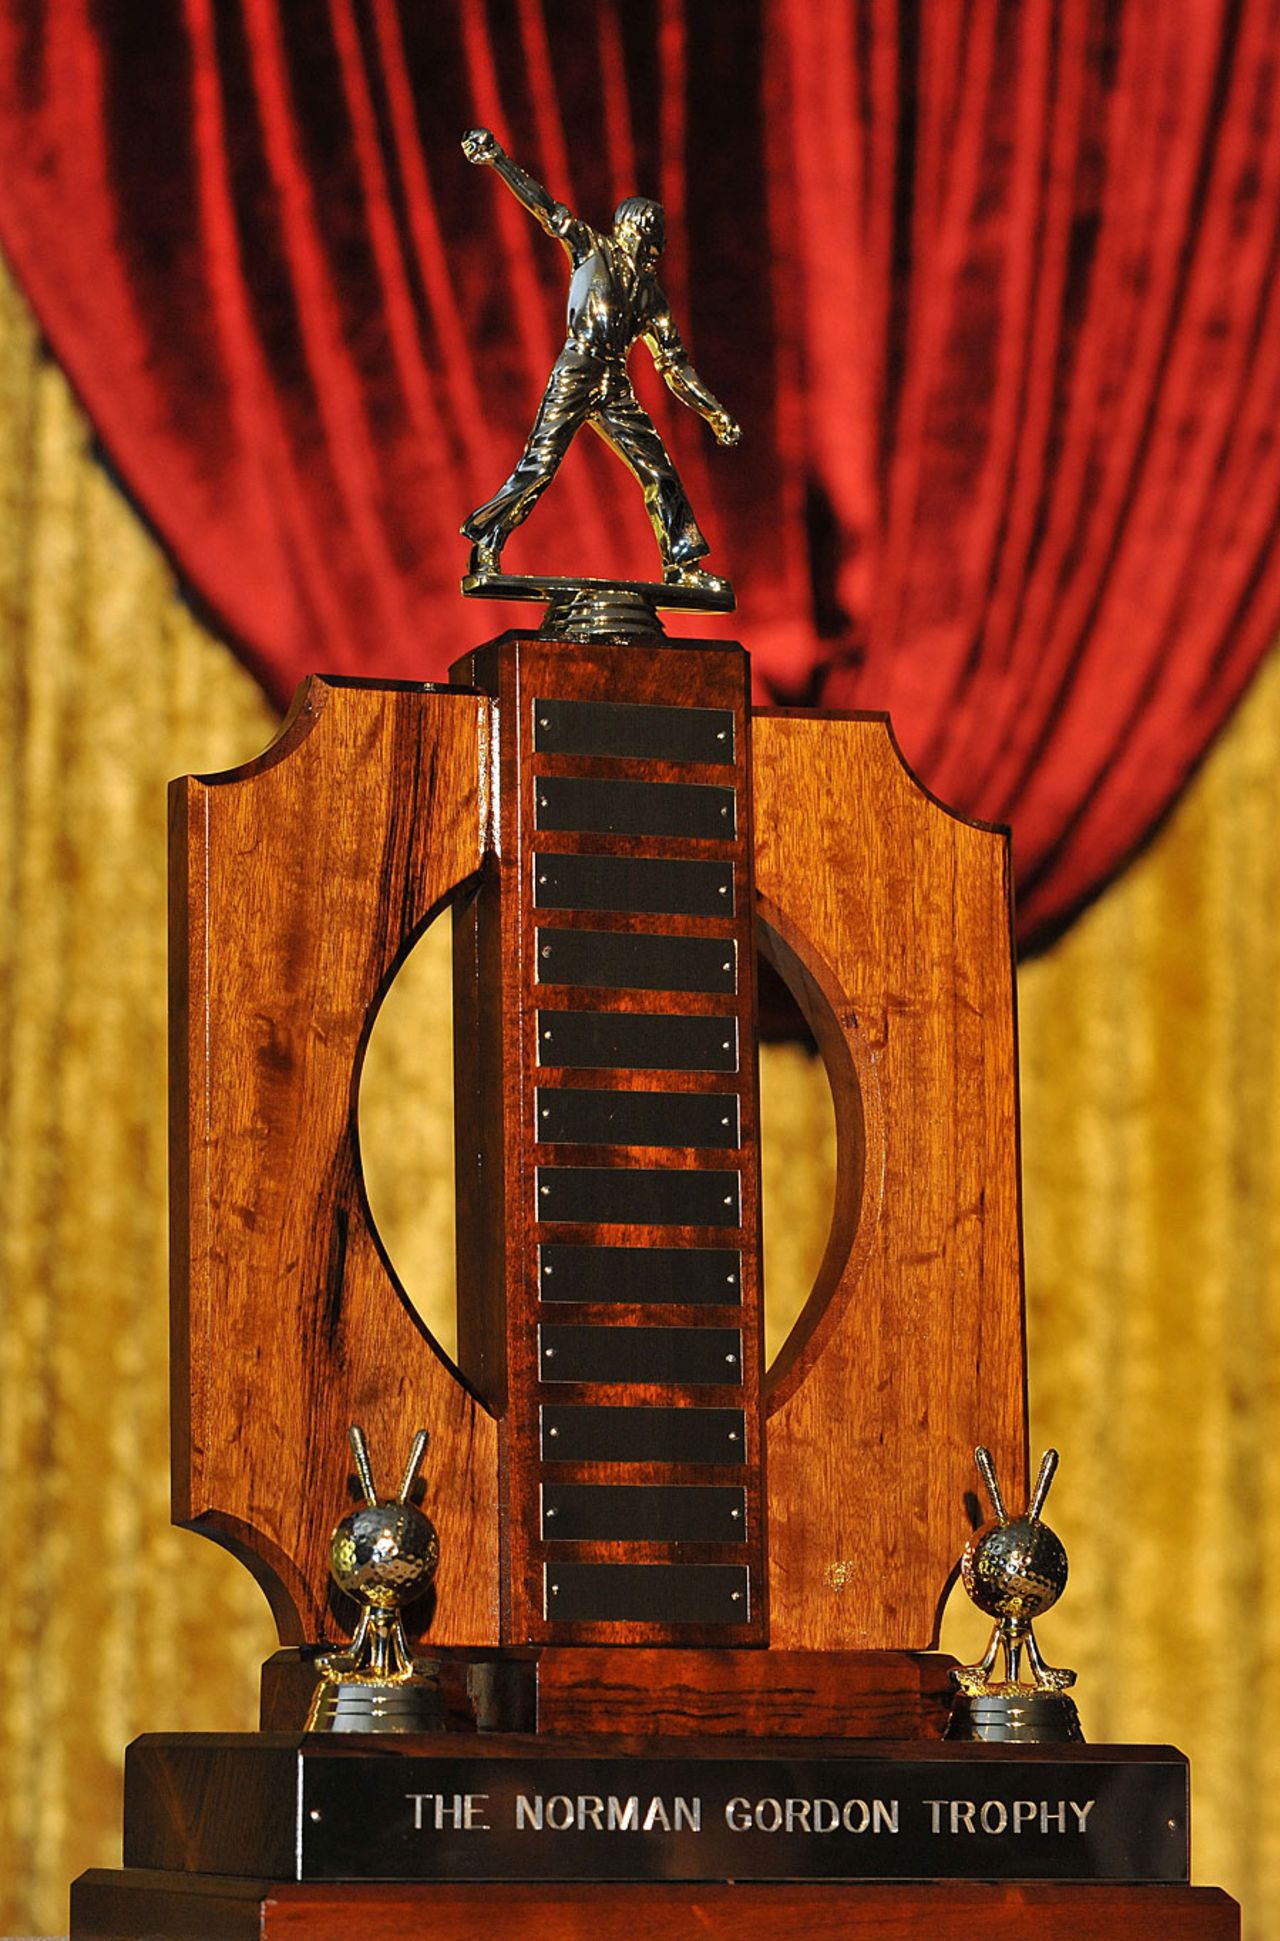 The Norman Gordon trophy, part of the birthday celebrations of the world's first Test cricketer to have lived 100 years, Johannesburg, August 6, 2011